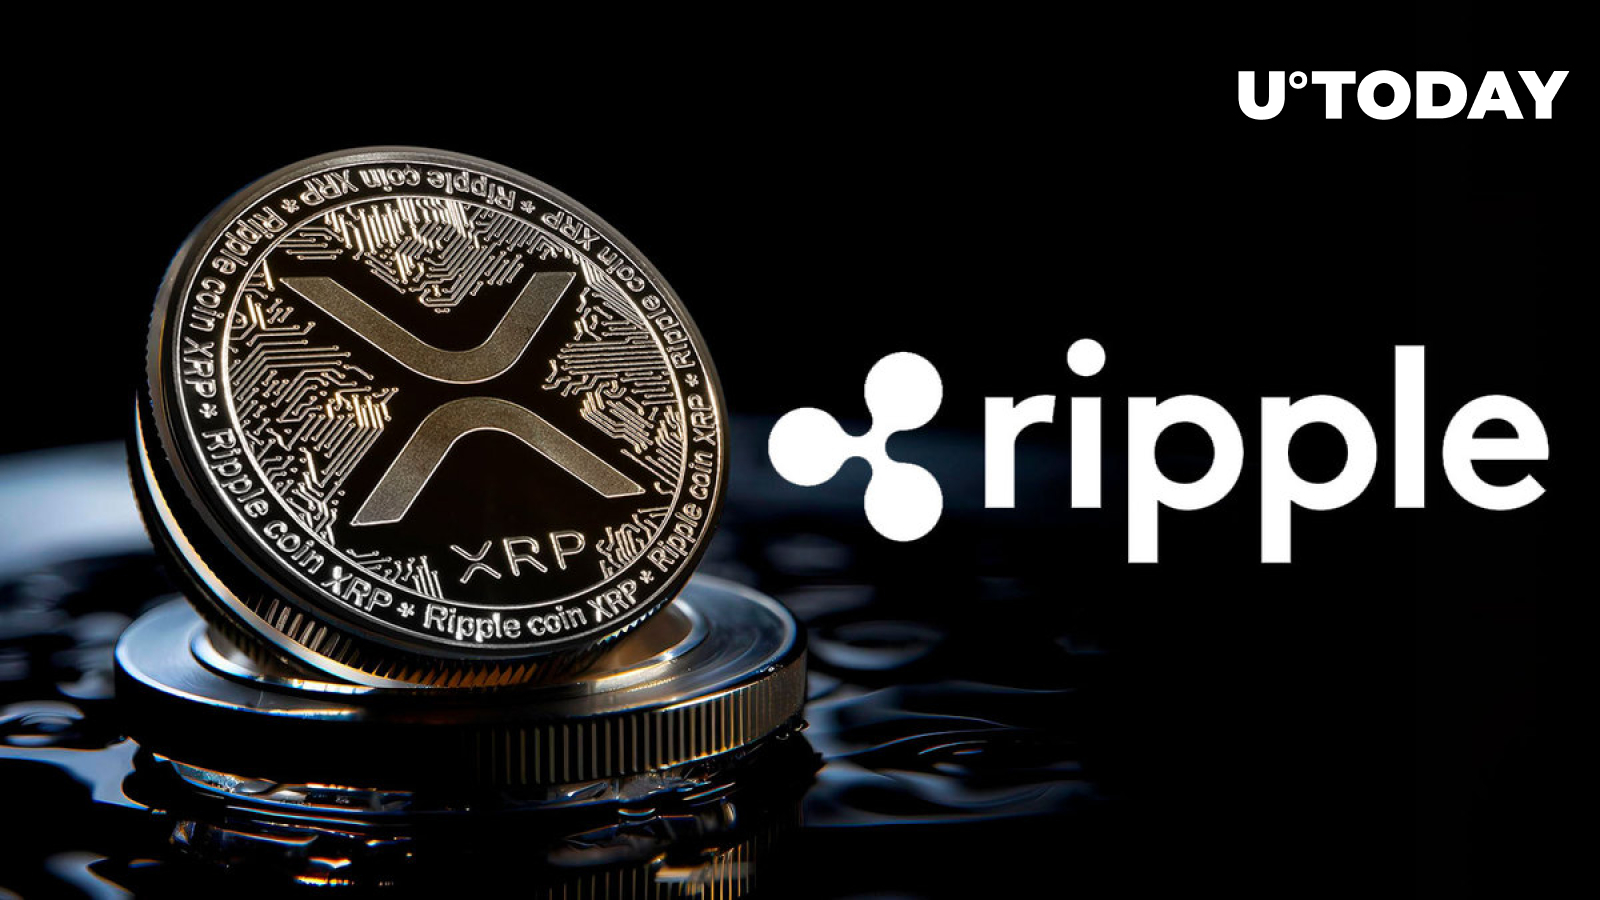 800 Million XRP Returned by Ripple in Unusual Transfer Activity